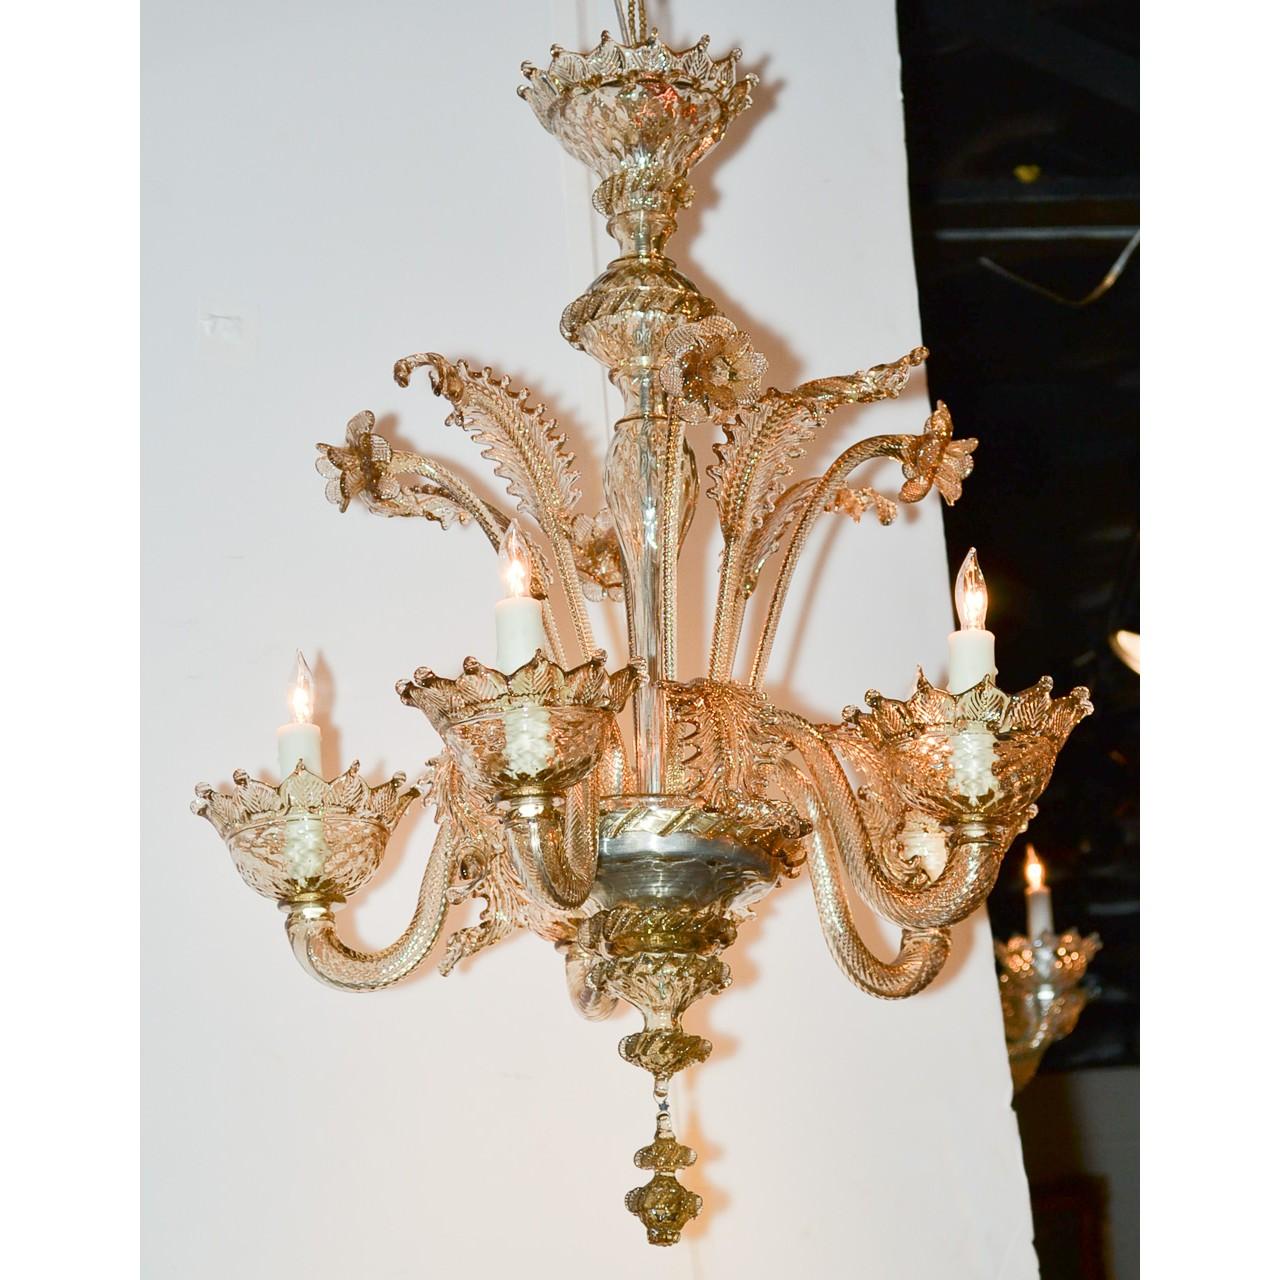 Dyed Early 20th Century Venetian Glass Chandelier